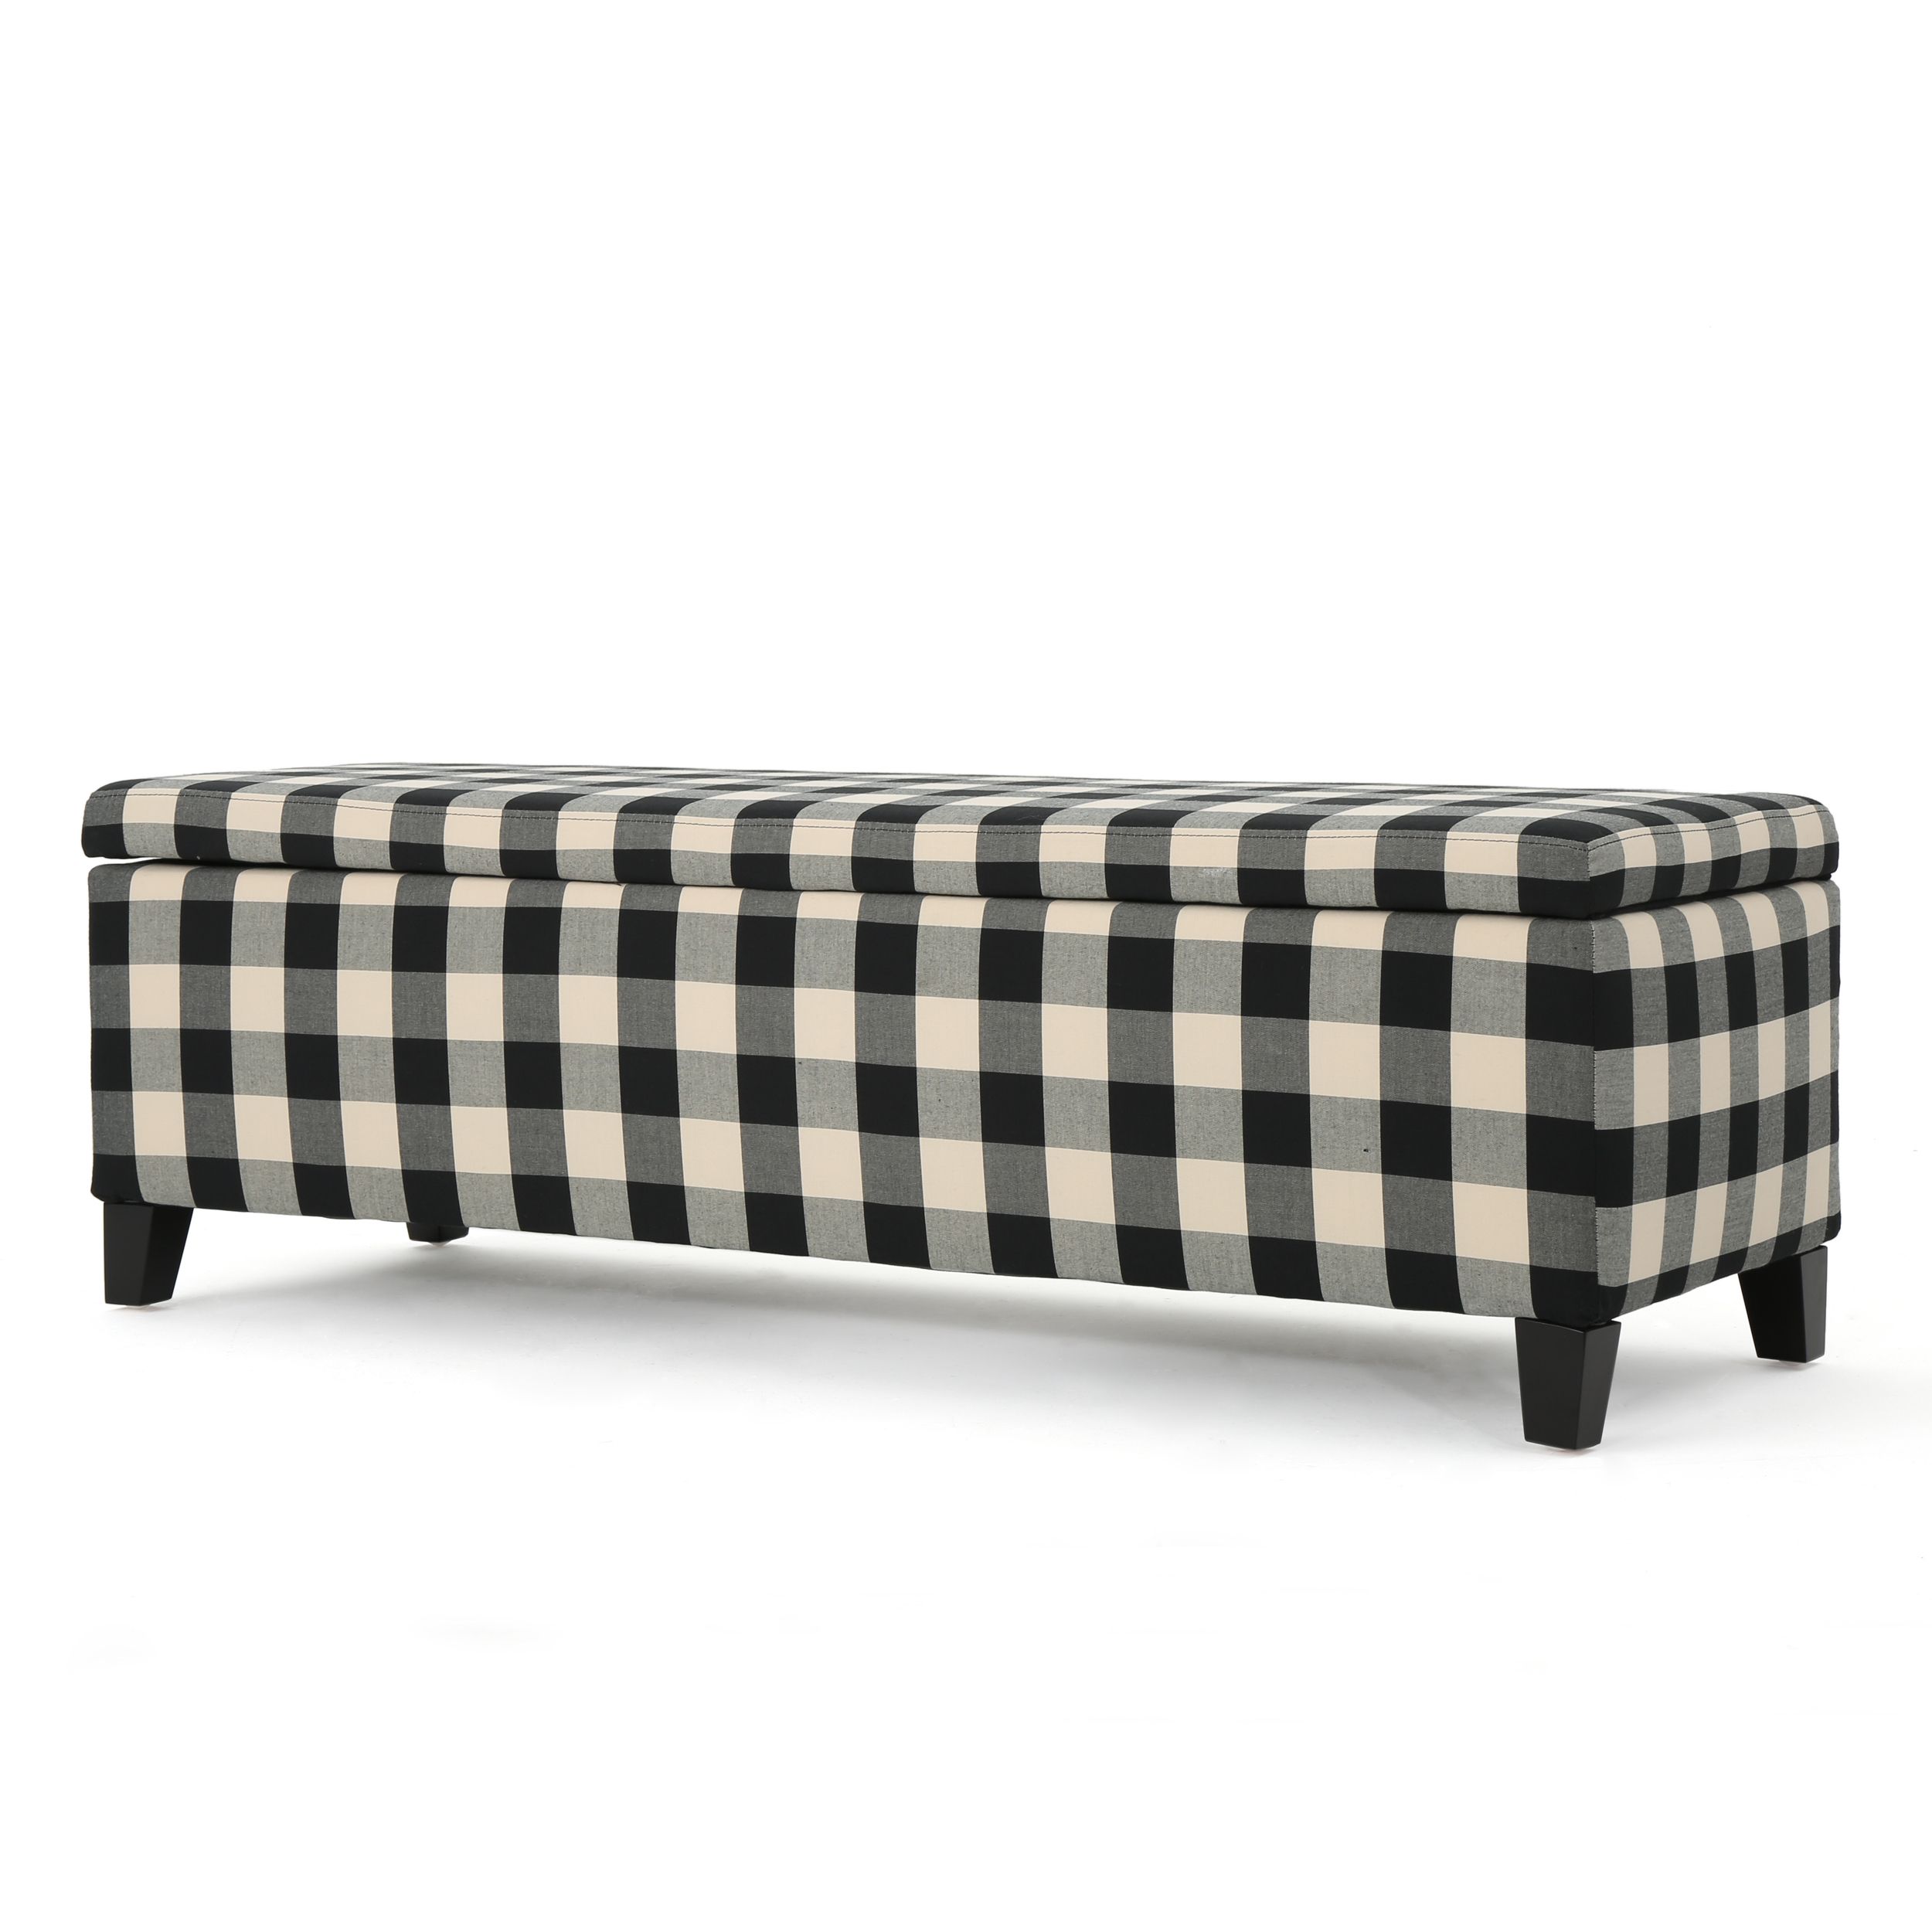 Colby Fabric Storage Ottoman, Black Checkerboard – Walmart Inside Black Fabric Ottomans With Fringe Trim (View 11 of 20)